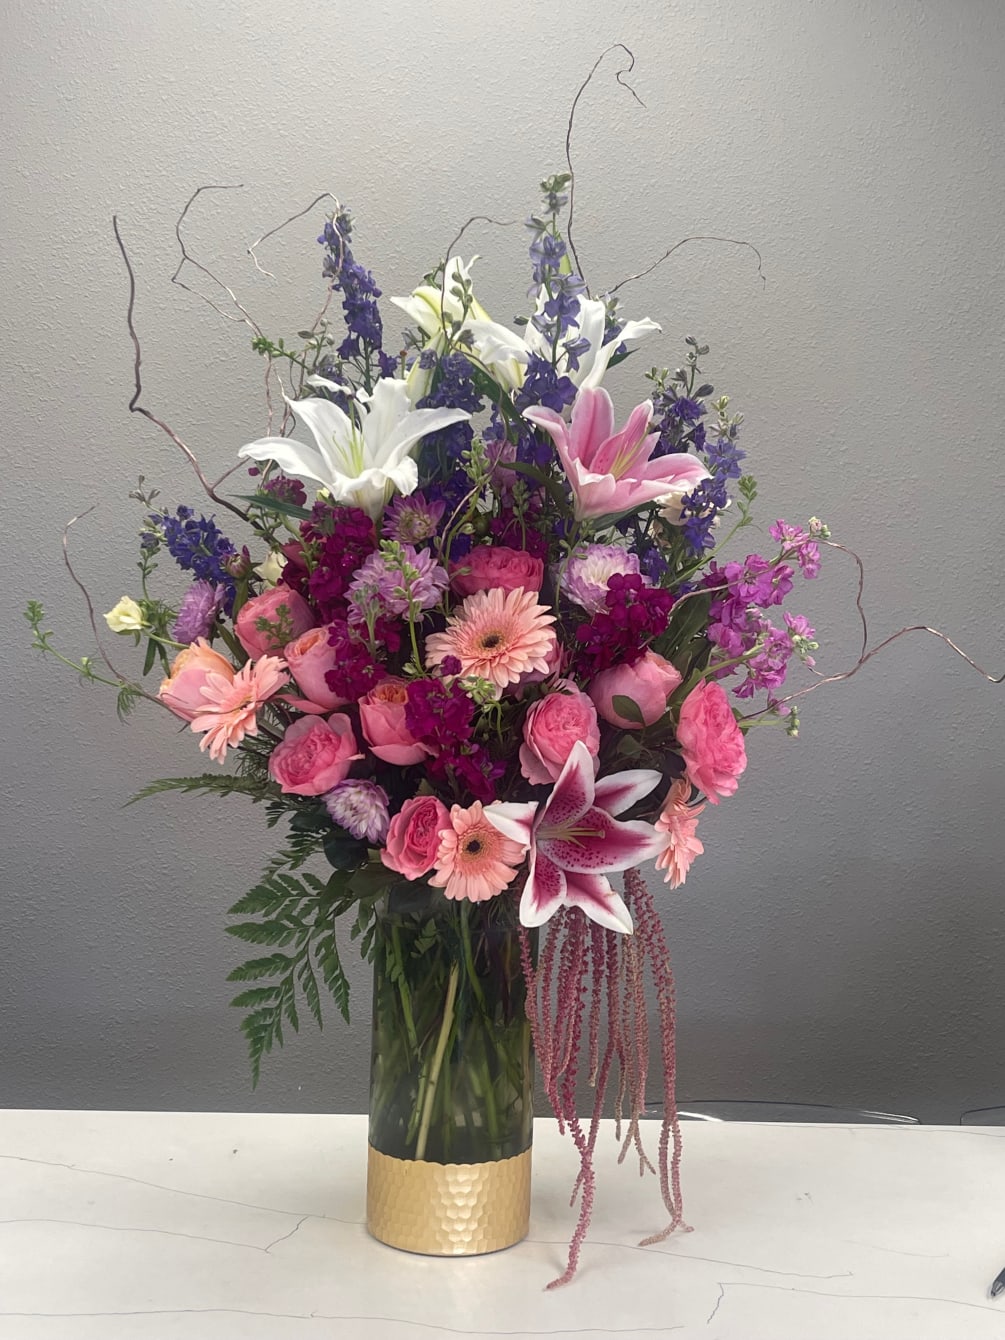 A FABULOUS COLLECTION OF PINK, LAVENDER, PURPLE FLOWERS MAKE THIS BOUQUET A